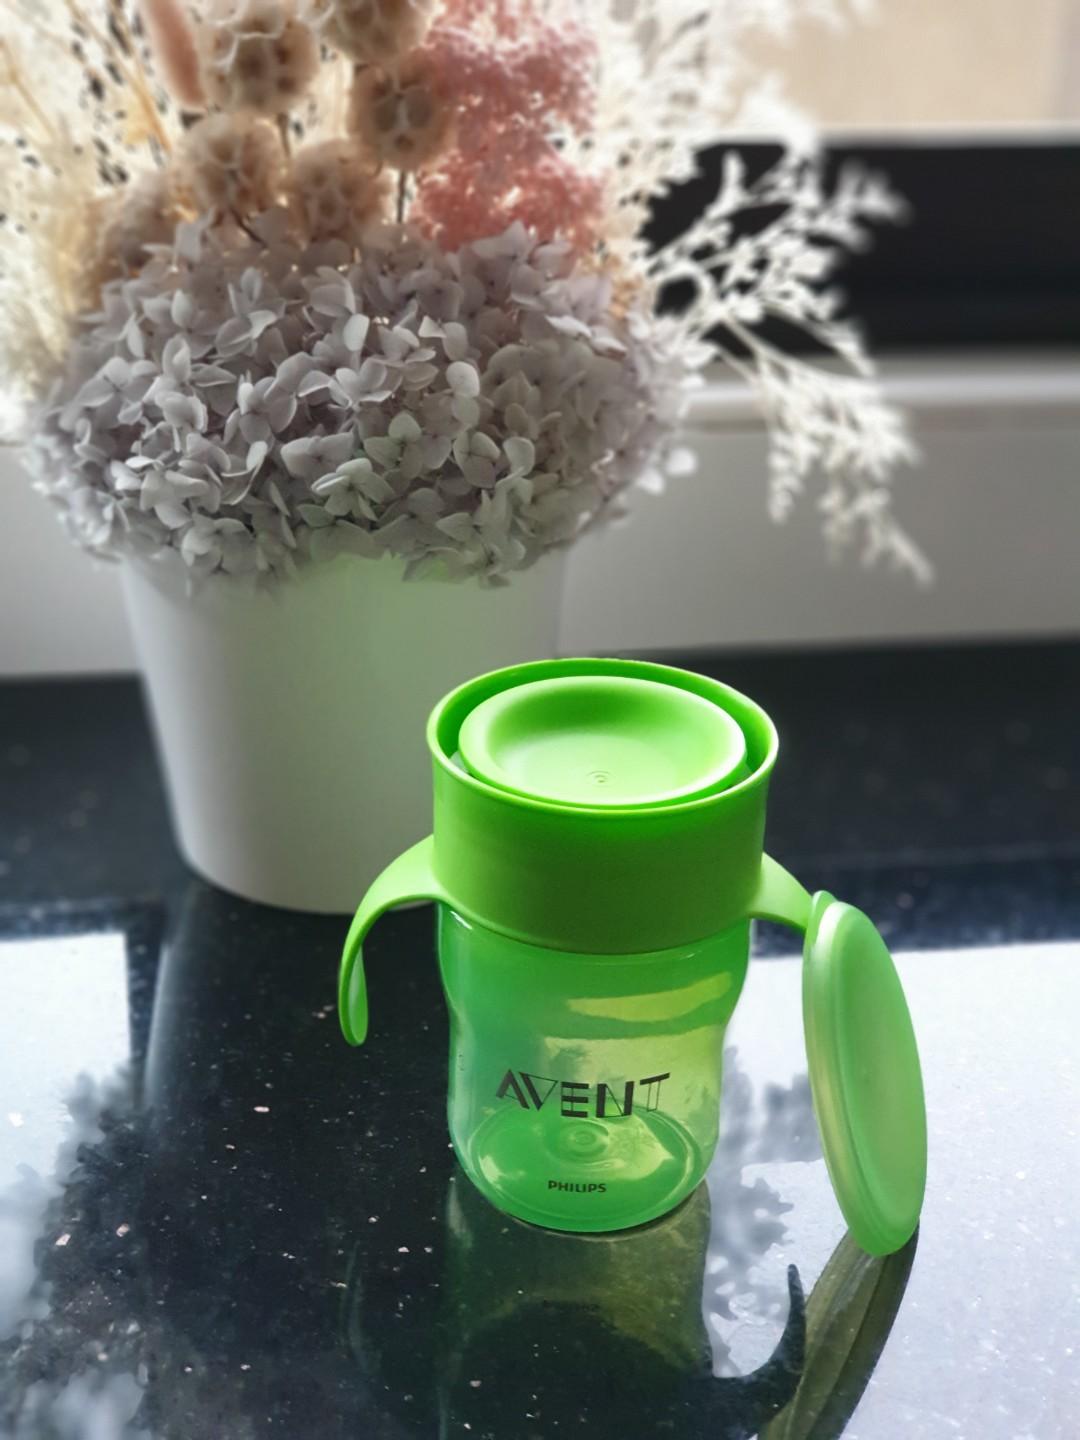 Philips AVENT Natural Drinking Cup Review